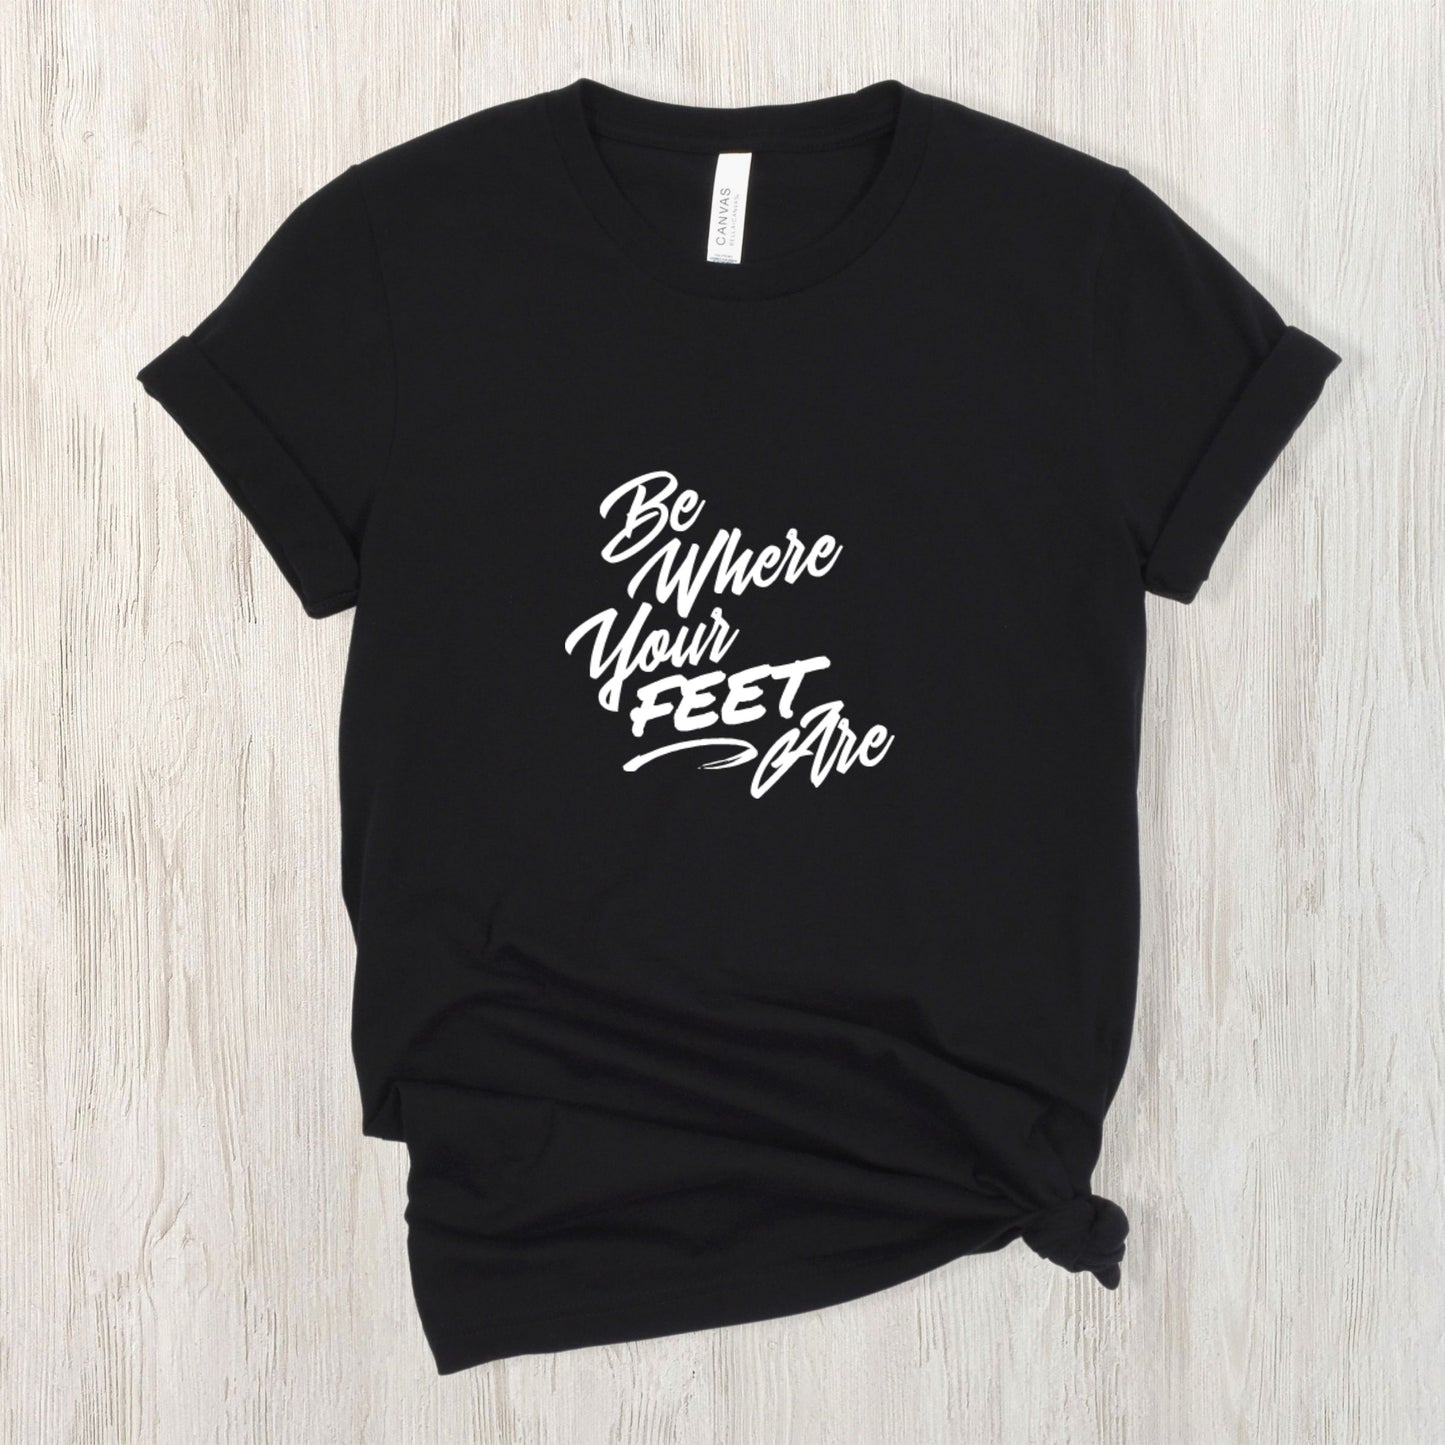 Be Where Your Feet Are Tee